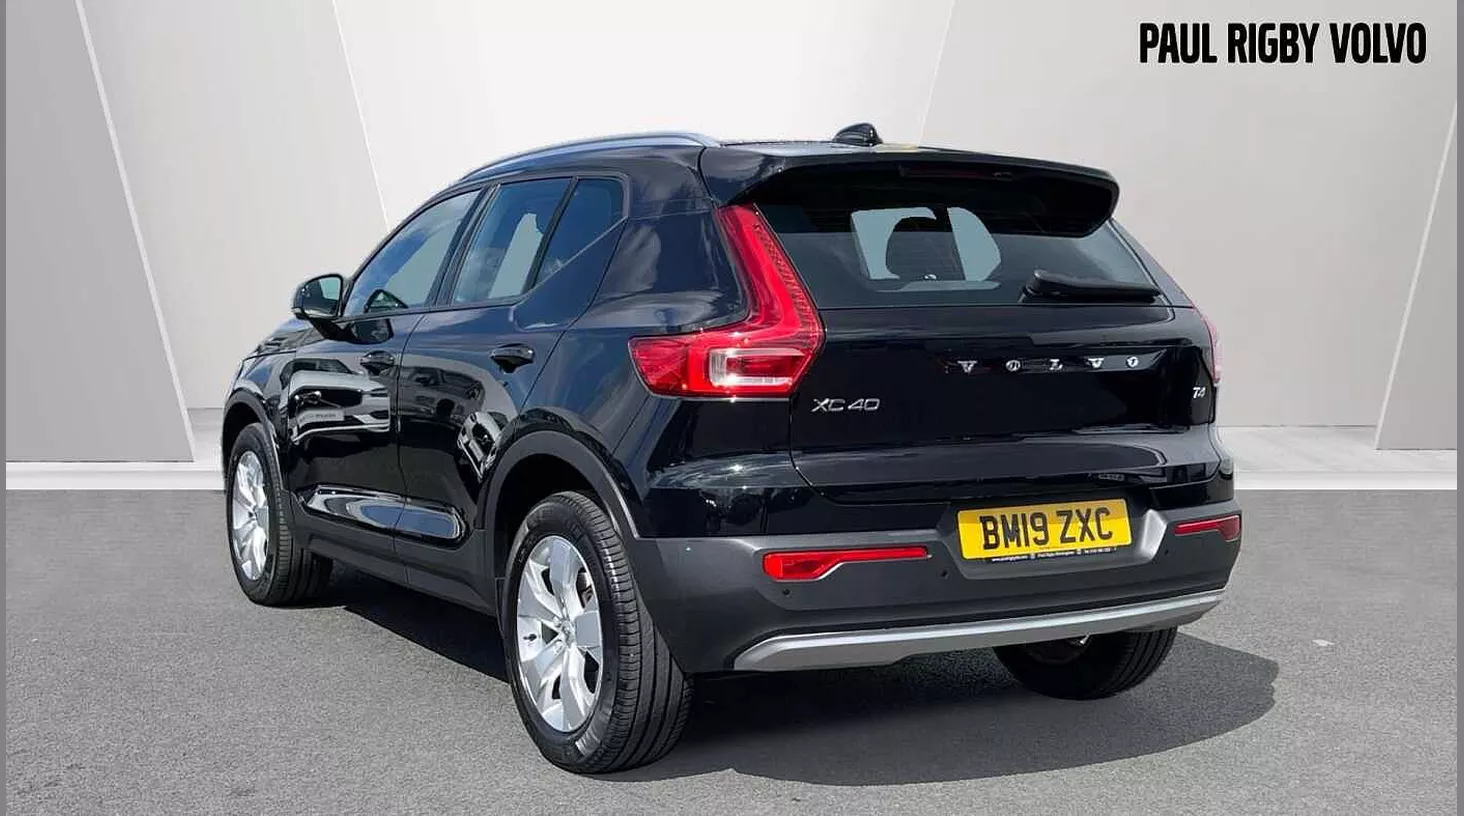 Volvo XC40 2.0 T4 Momentum Pro 5dr Geartronic